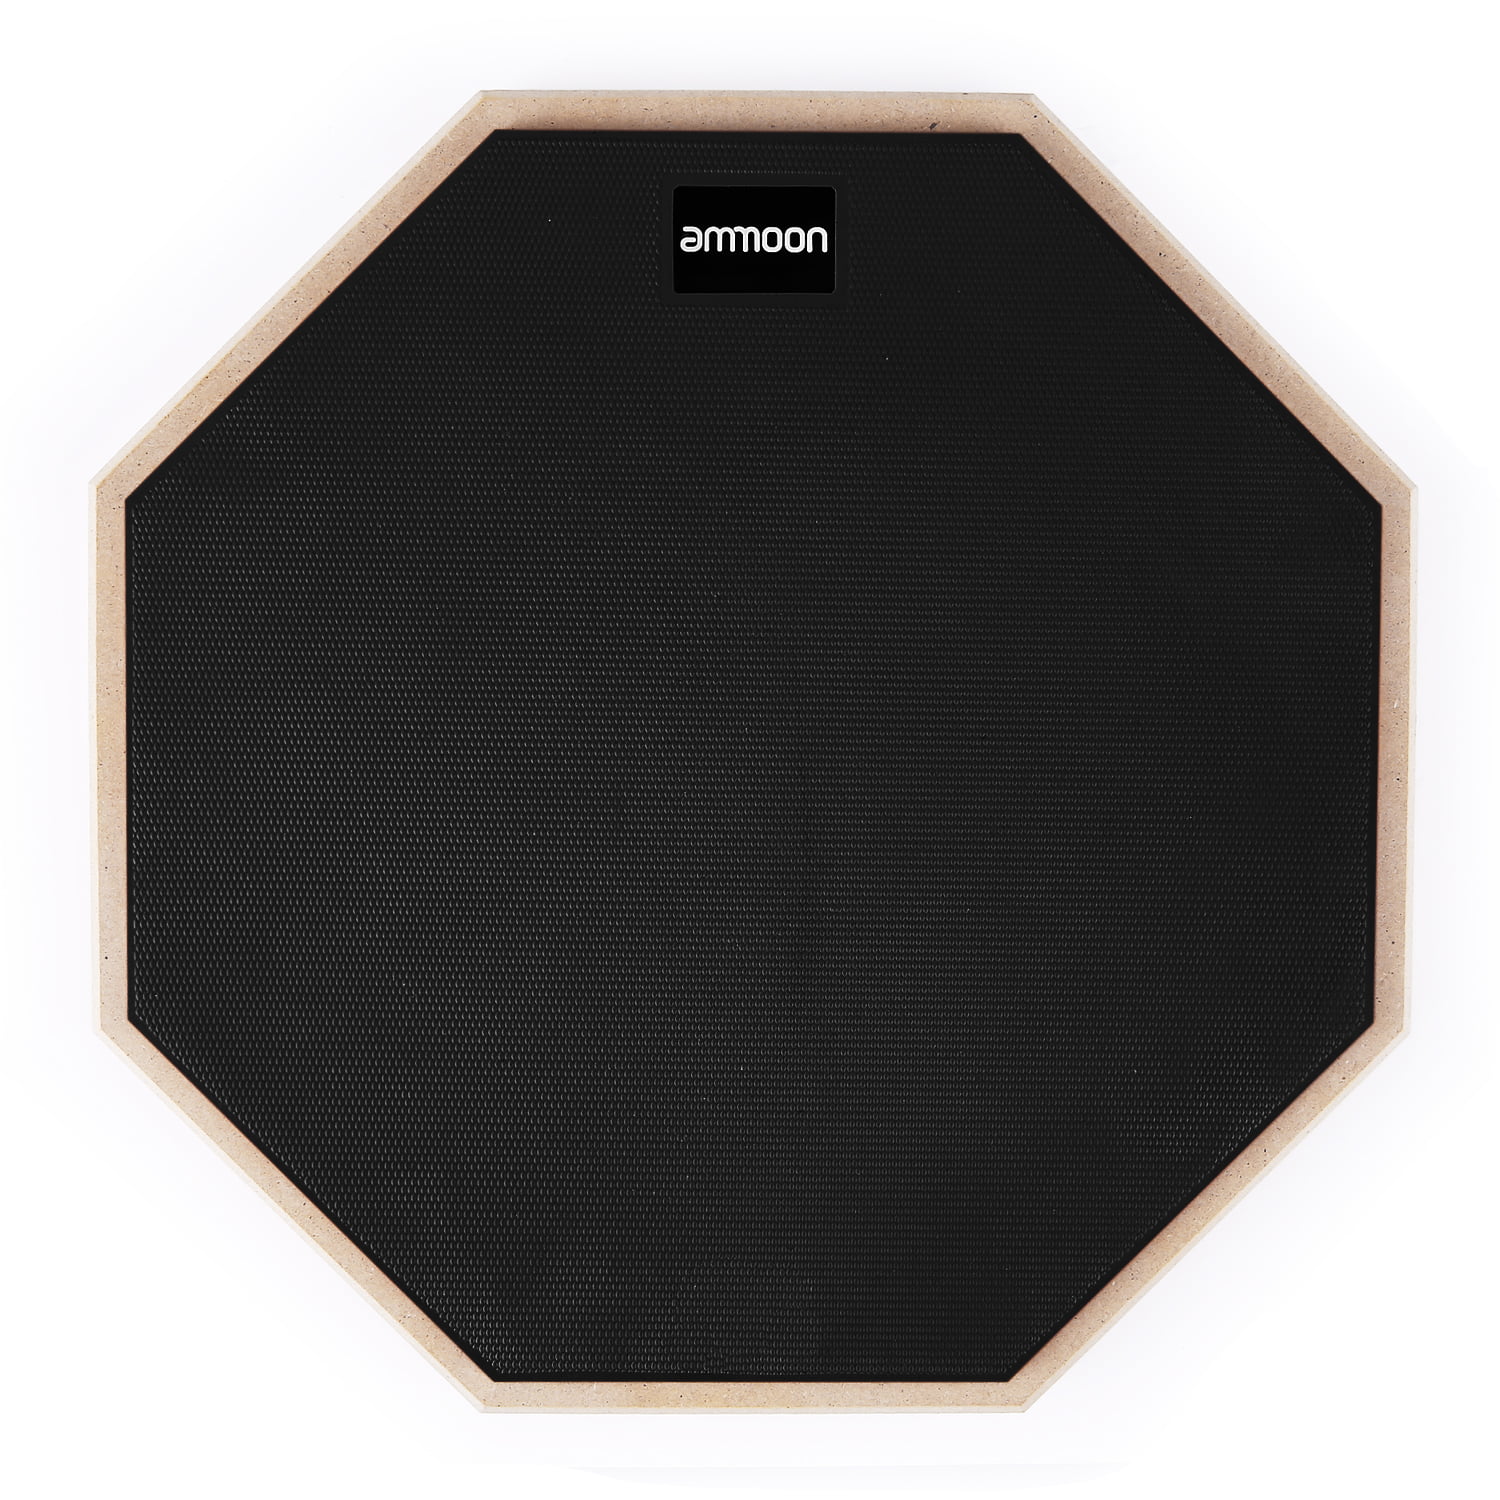 Tosnail 12-inch Silent Drum Practice Pad with Wooden Base and Steel Frame